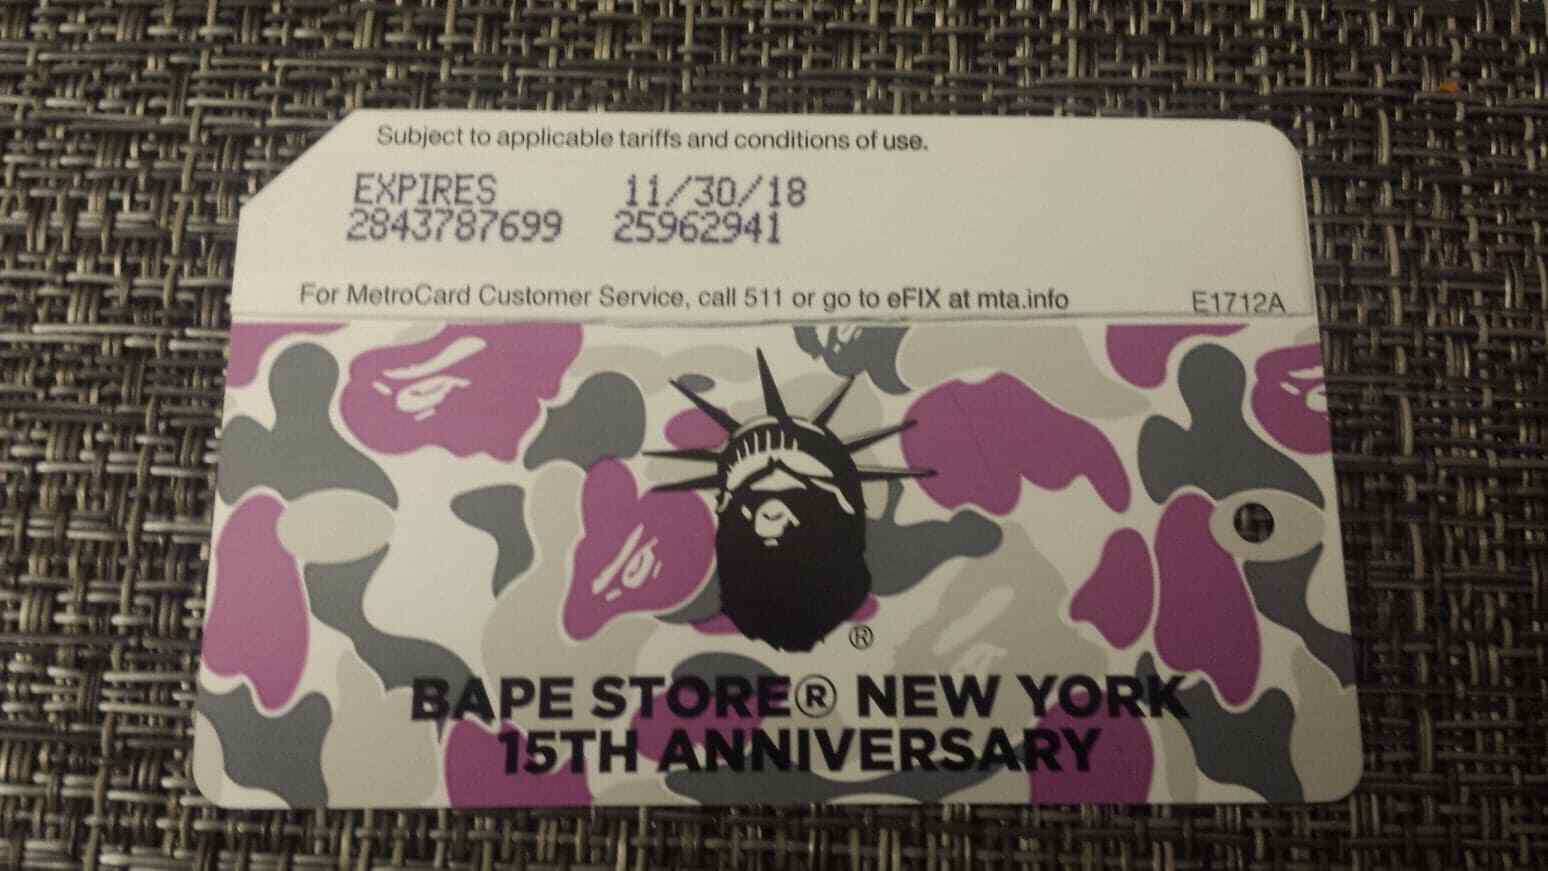 BAPE NYC MTA 15th ANNIVERSARY Metrocard Expired Collectible Item 